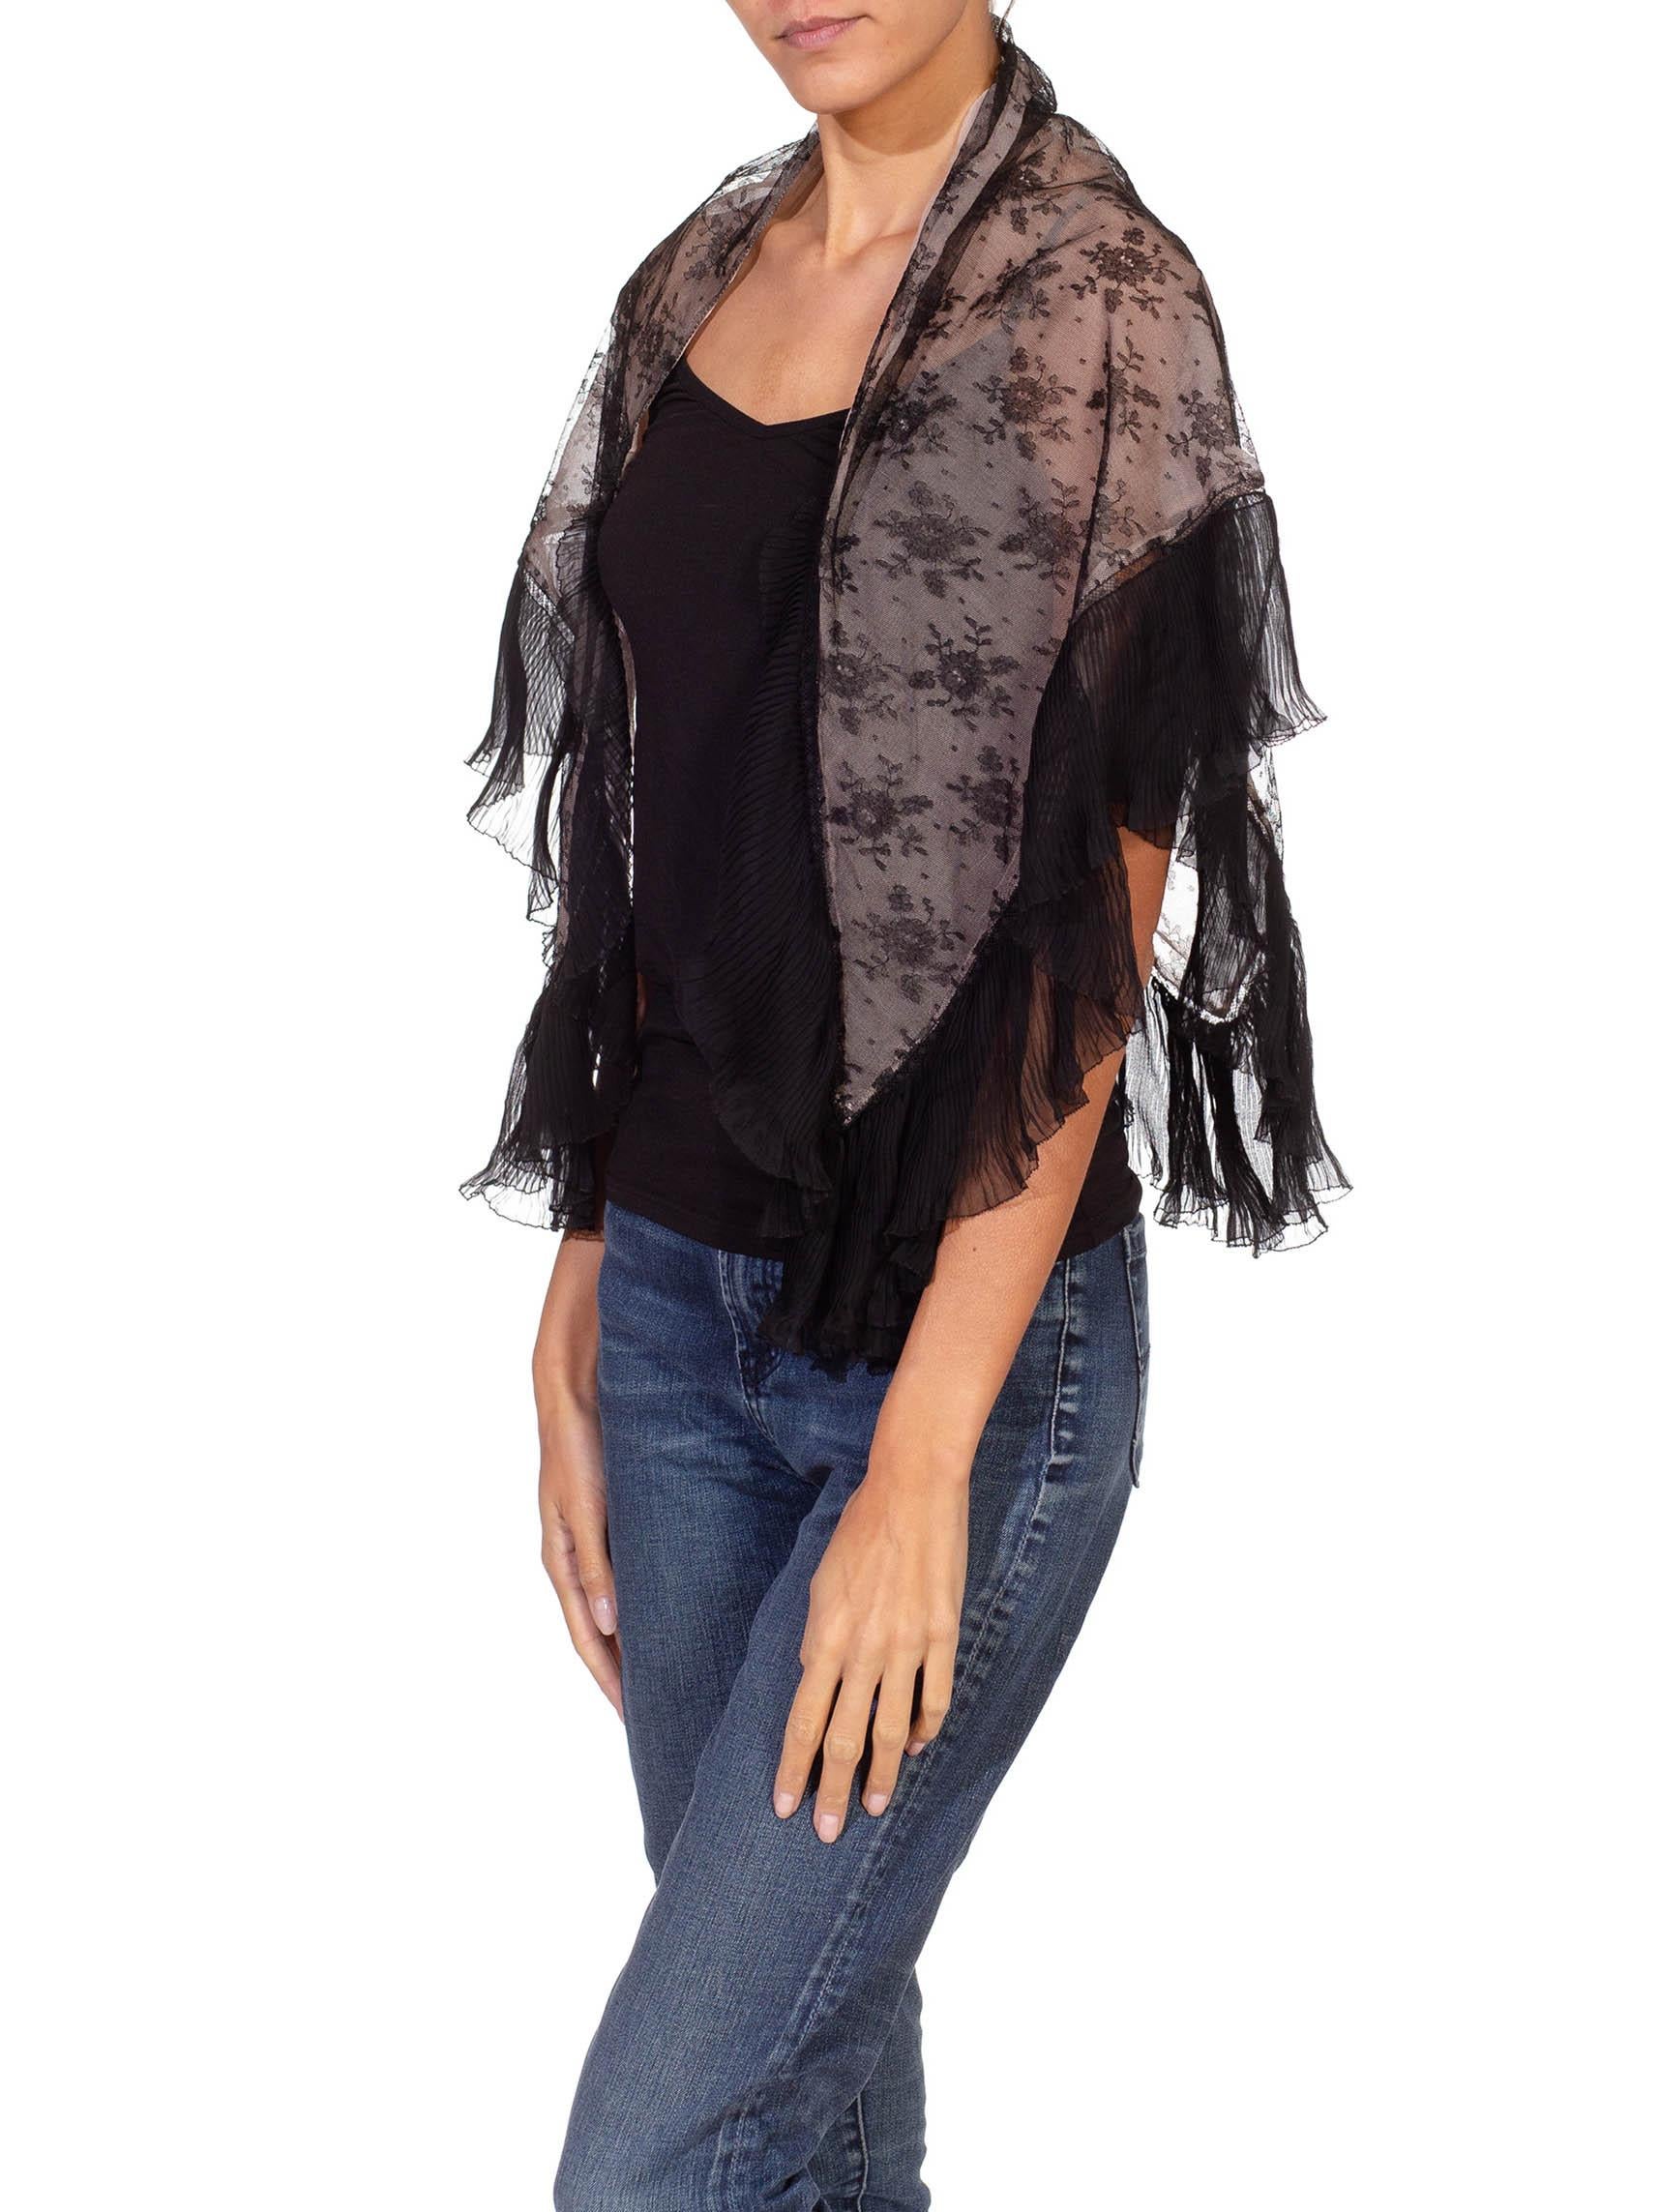 Victorian Blush Pink Black Lace Shawl In Excellent Condition For Sale In New York, NY